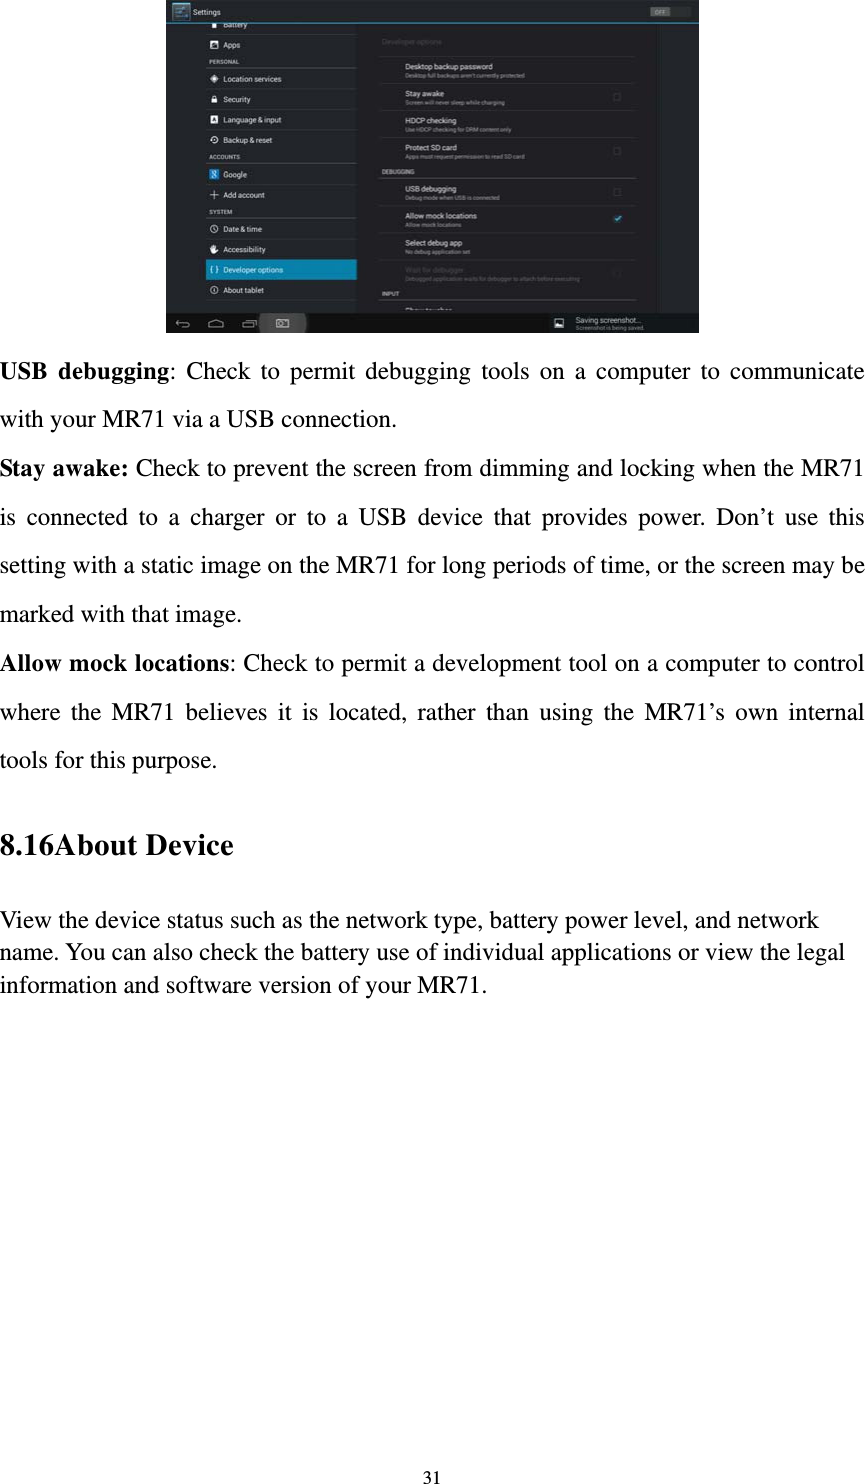 31  USB debugging: Check to permit debugging tools on a computer to communicate with your MR71 via a USB connection. Stay awake: Check to prevent the screen from dimming and locking when the MR71 is connected to a charger or to a USB device that provides power. Don’t use this setting with a static image on the MR71 for long periods of time, or the screen may be marked with that image. Allow mock locations: Check to permit a development tool on a computer to control where the MR71 believes it is located, rather than using the MR71’s own internal tools for this purpose. 8.16About Device View the device status such as the network type, battery power level, and network name. You can also check the battery use of individual applications or view the legal information and software version of your MR71.   